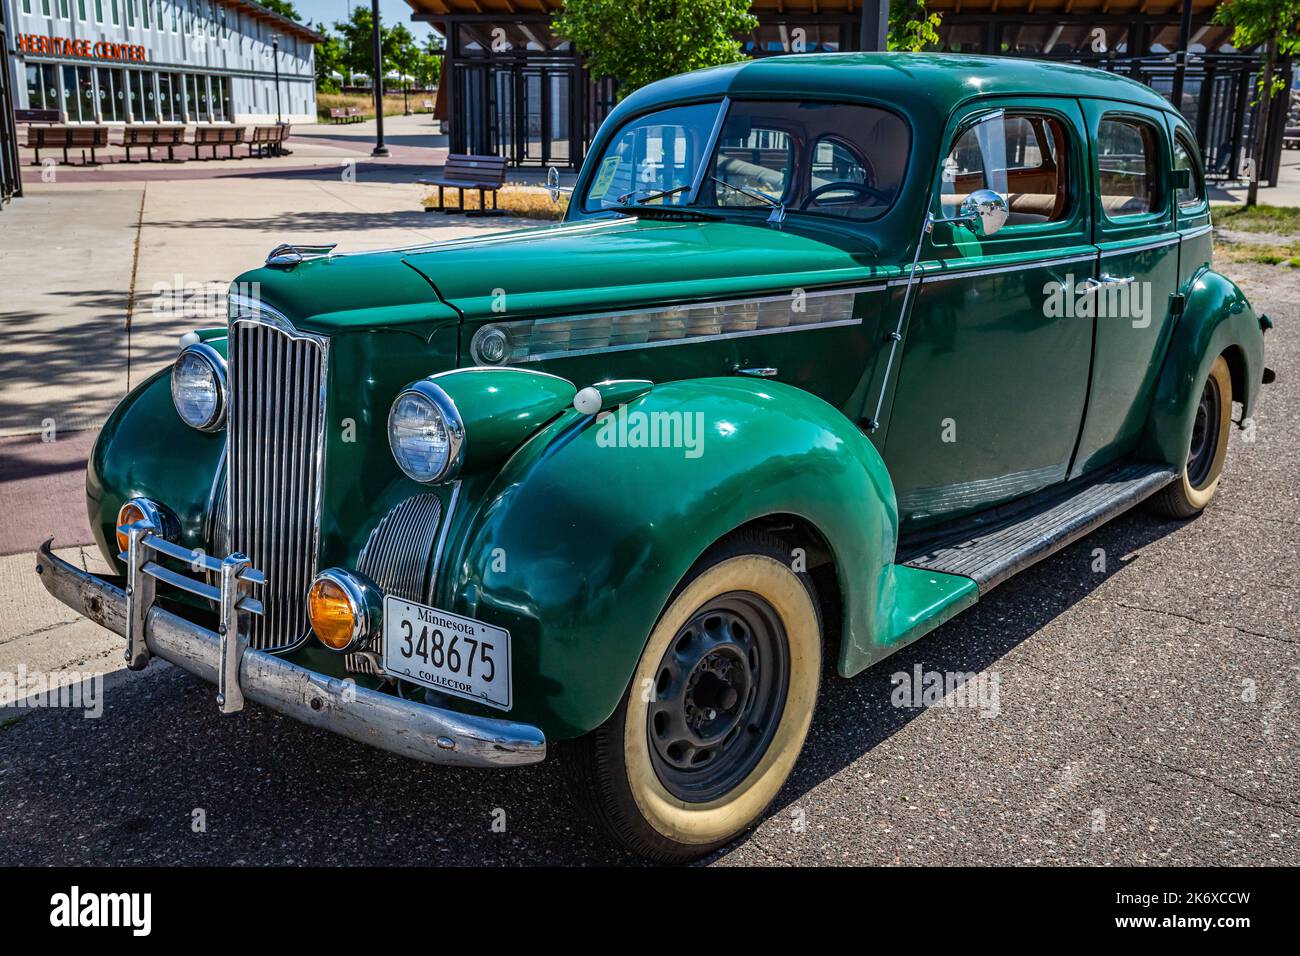 Falcon Heights, MN - June 19, 2022: High perspective front corner view of a 1940 Packard 110 4 Door Sedan at a local car show. Stock Photo